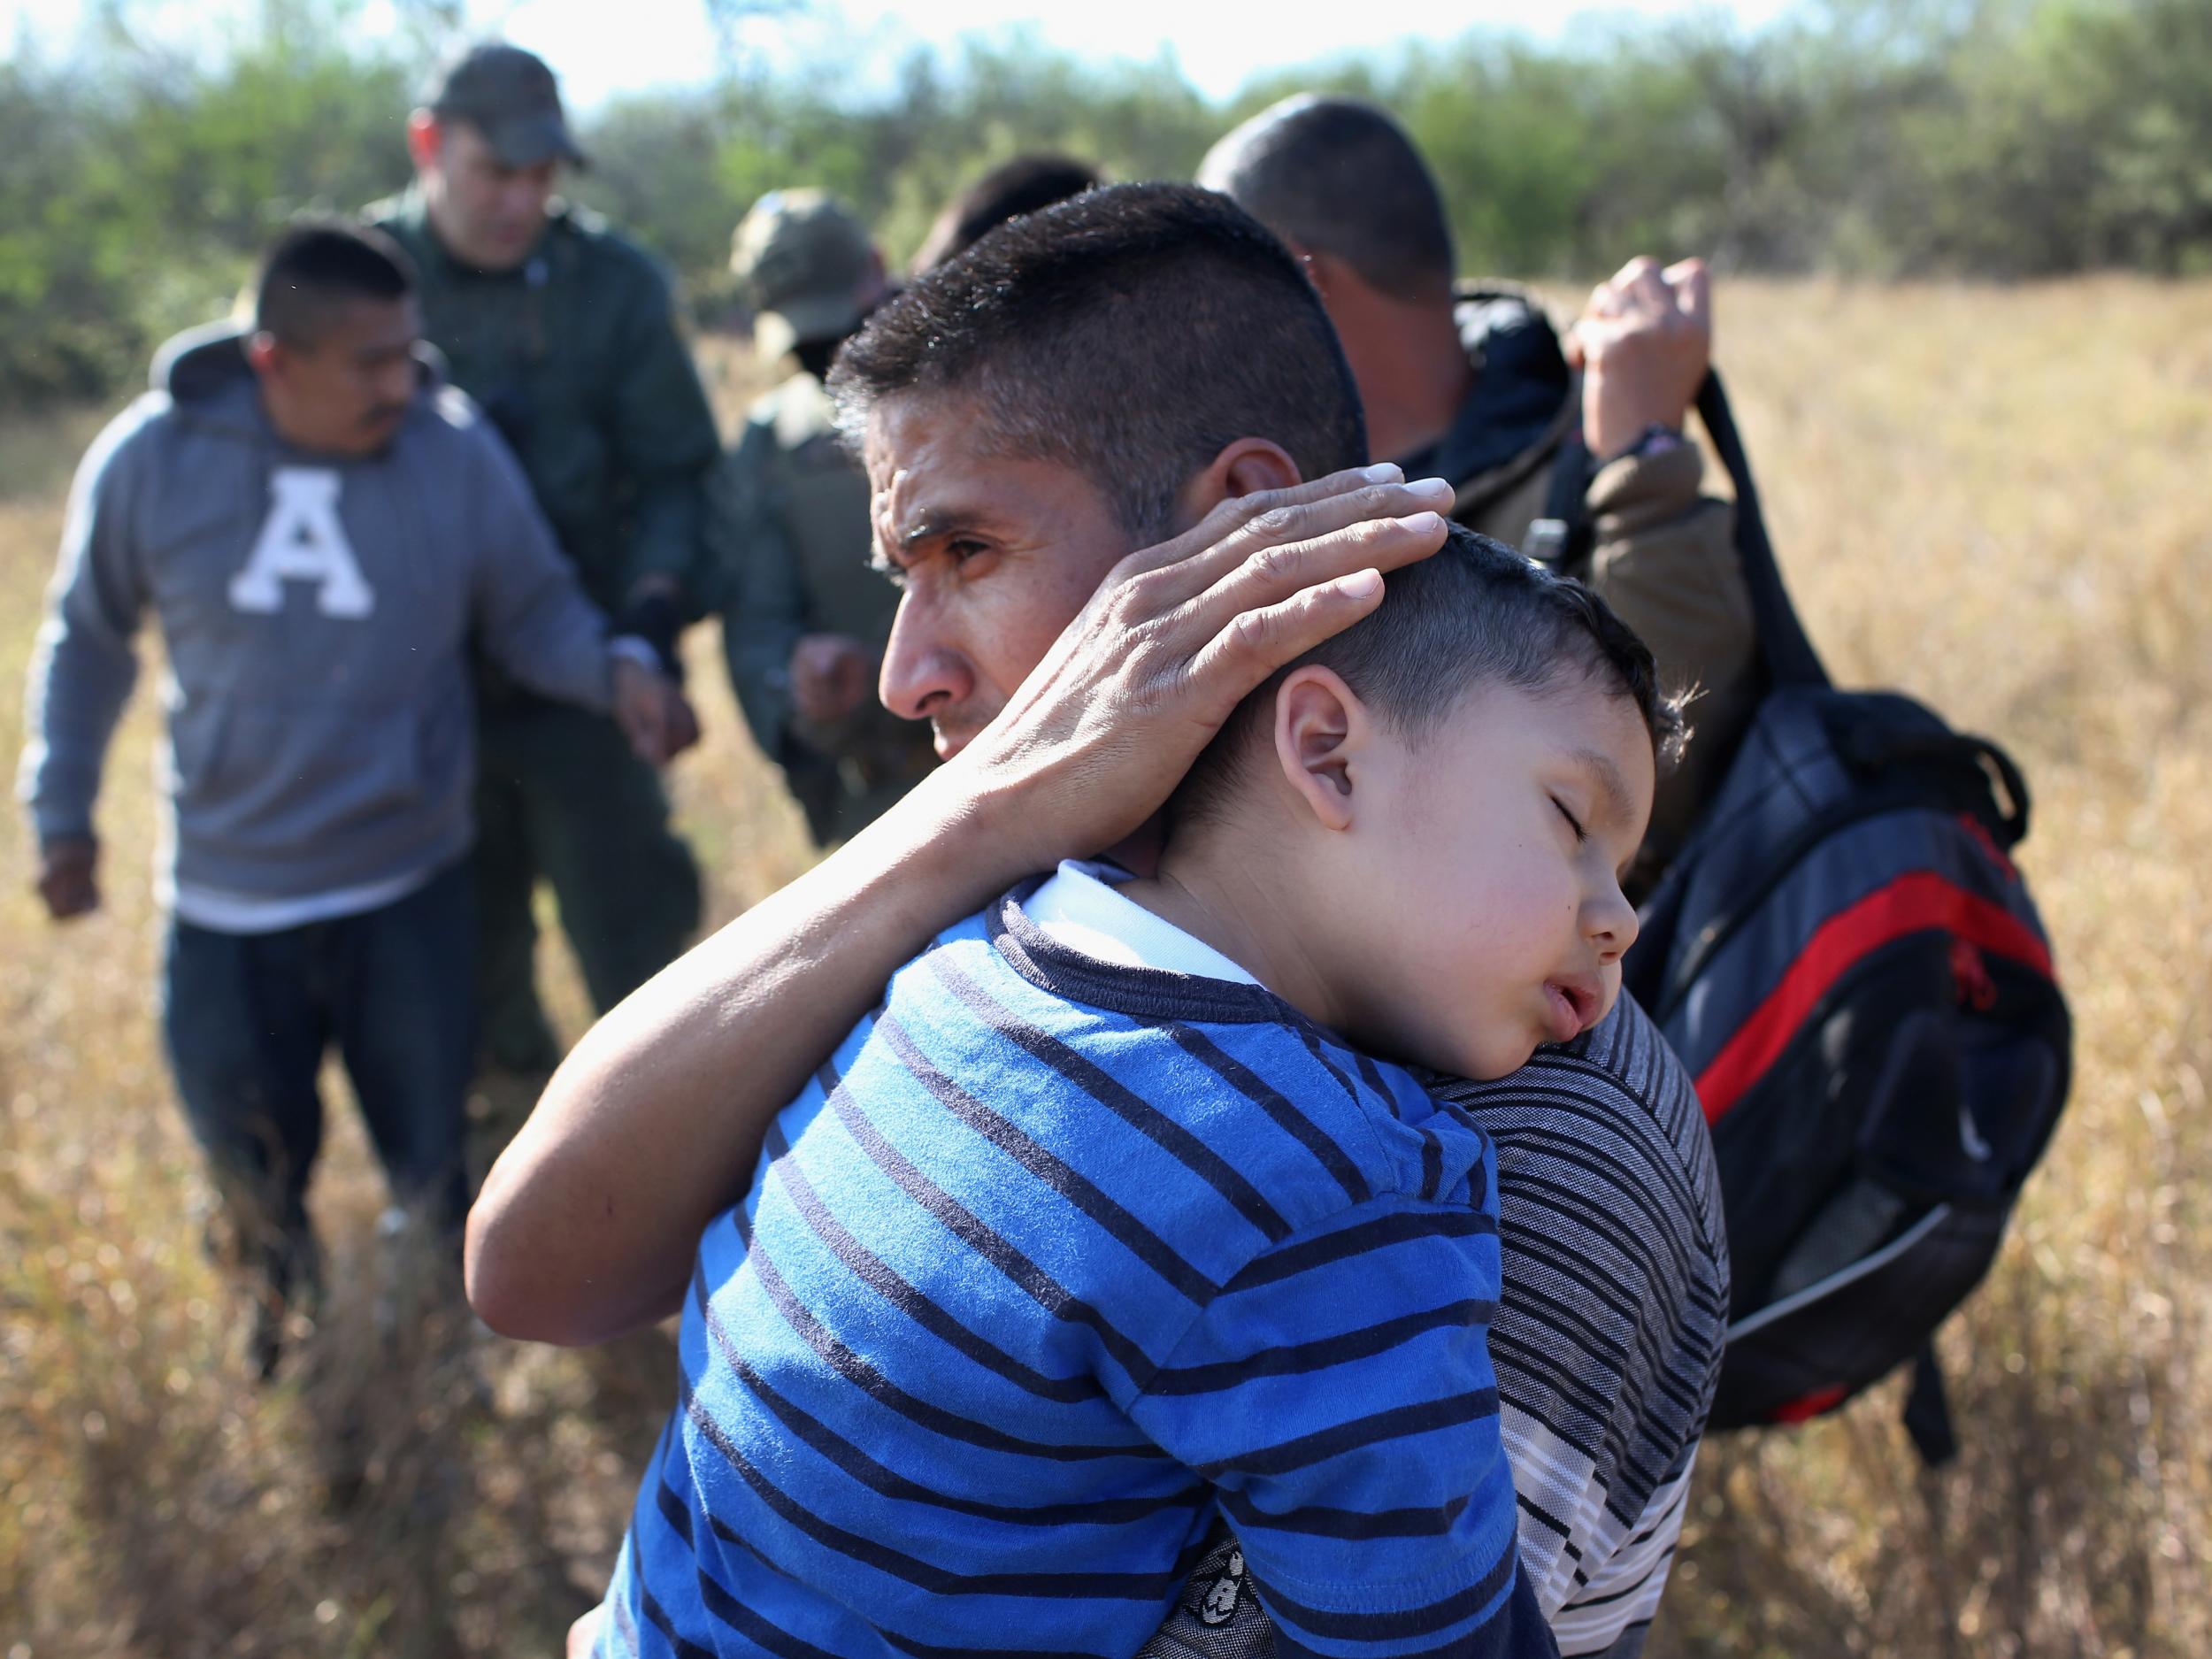 The Children From Immigrant Families